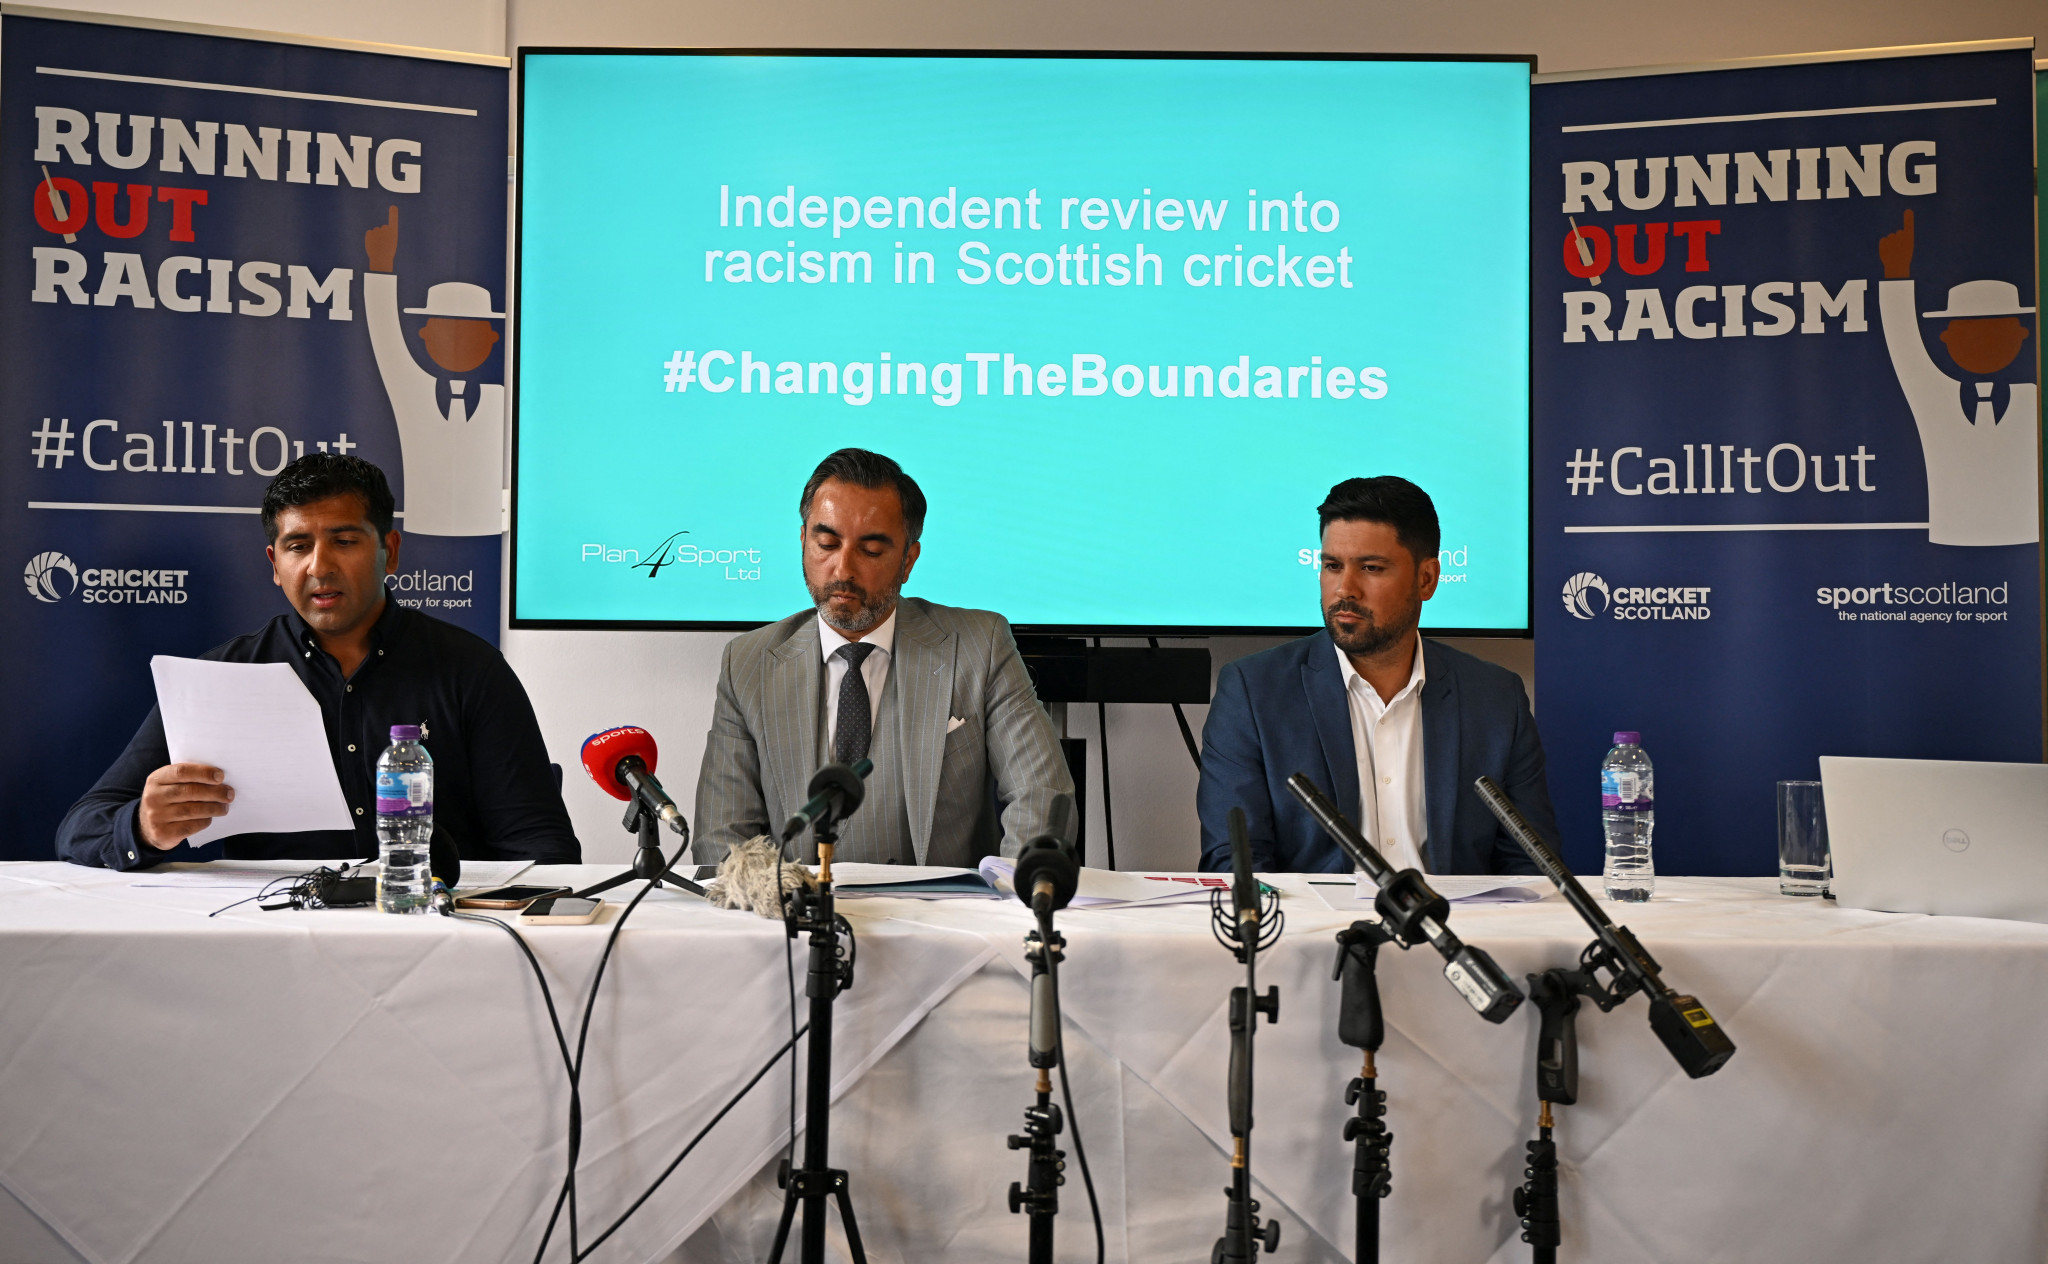 Cricket Scotland failed in 29 out of 31 tests used to measure institutional racism, according to a damning new report ©Getty Images